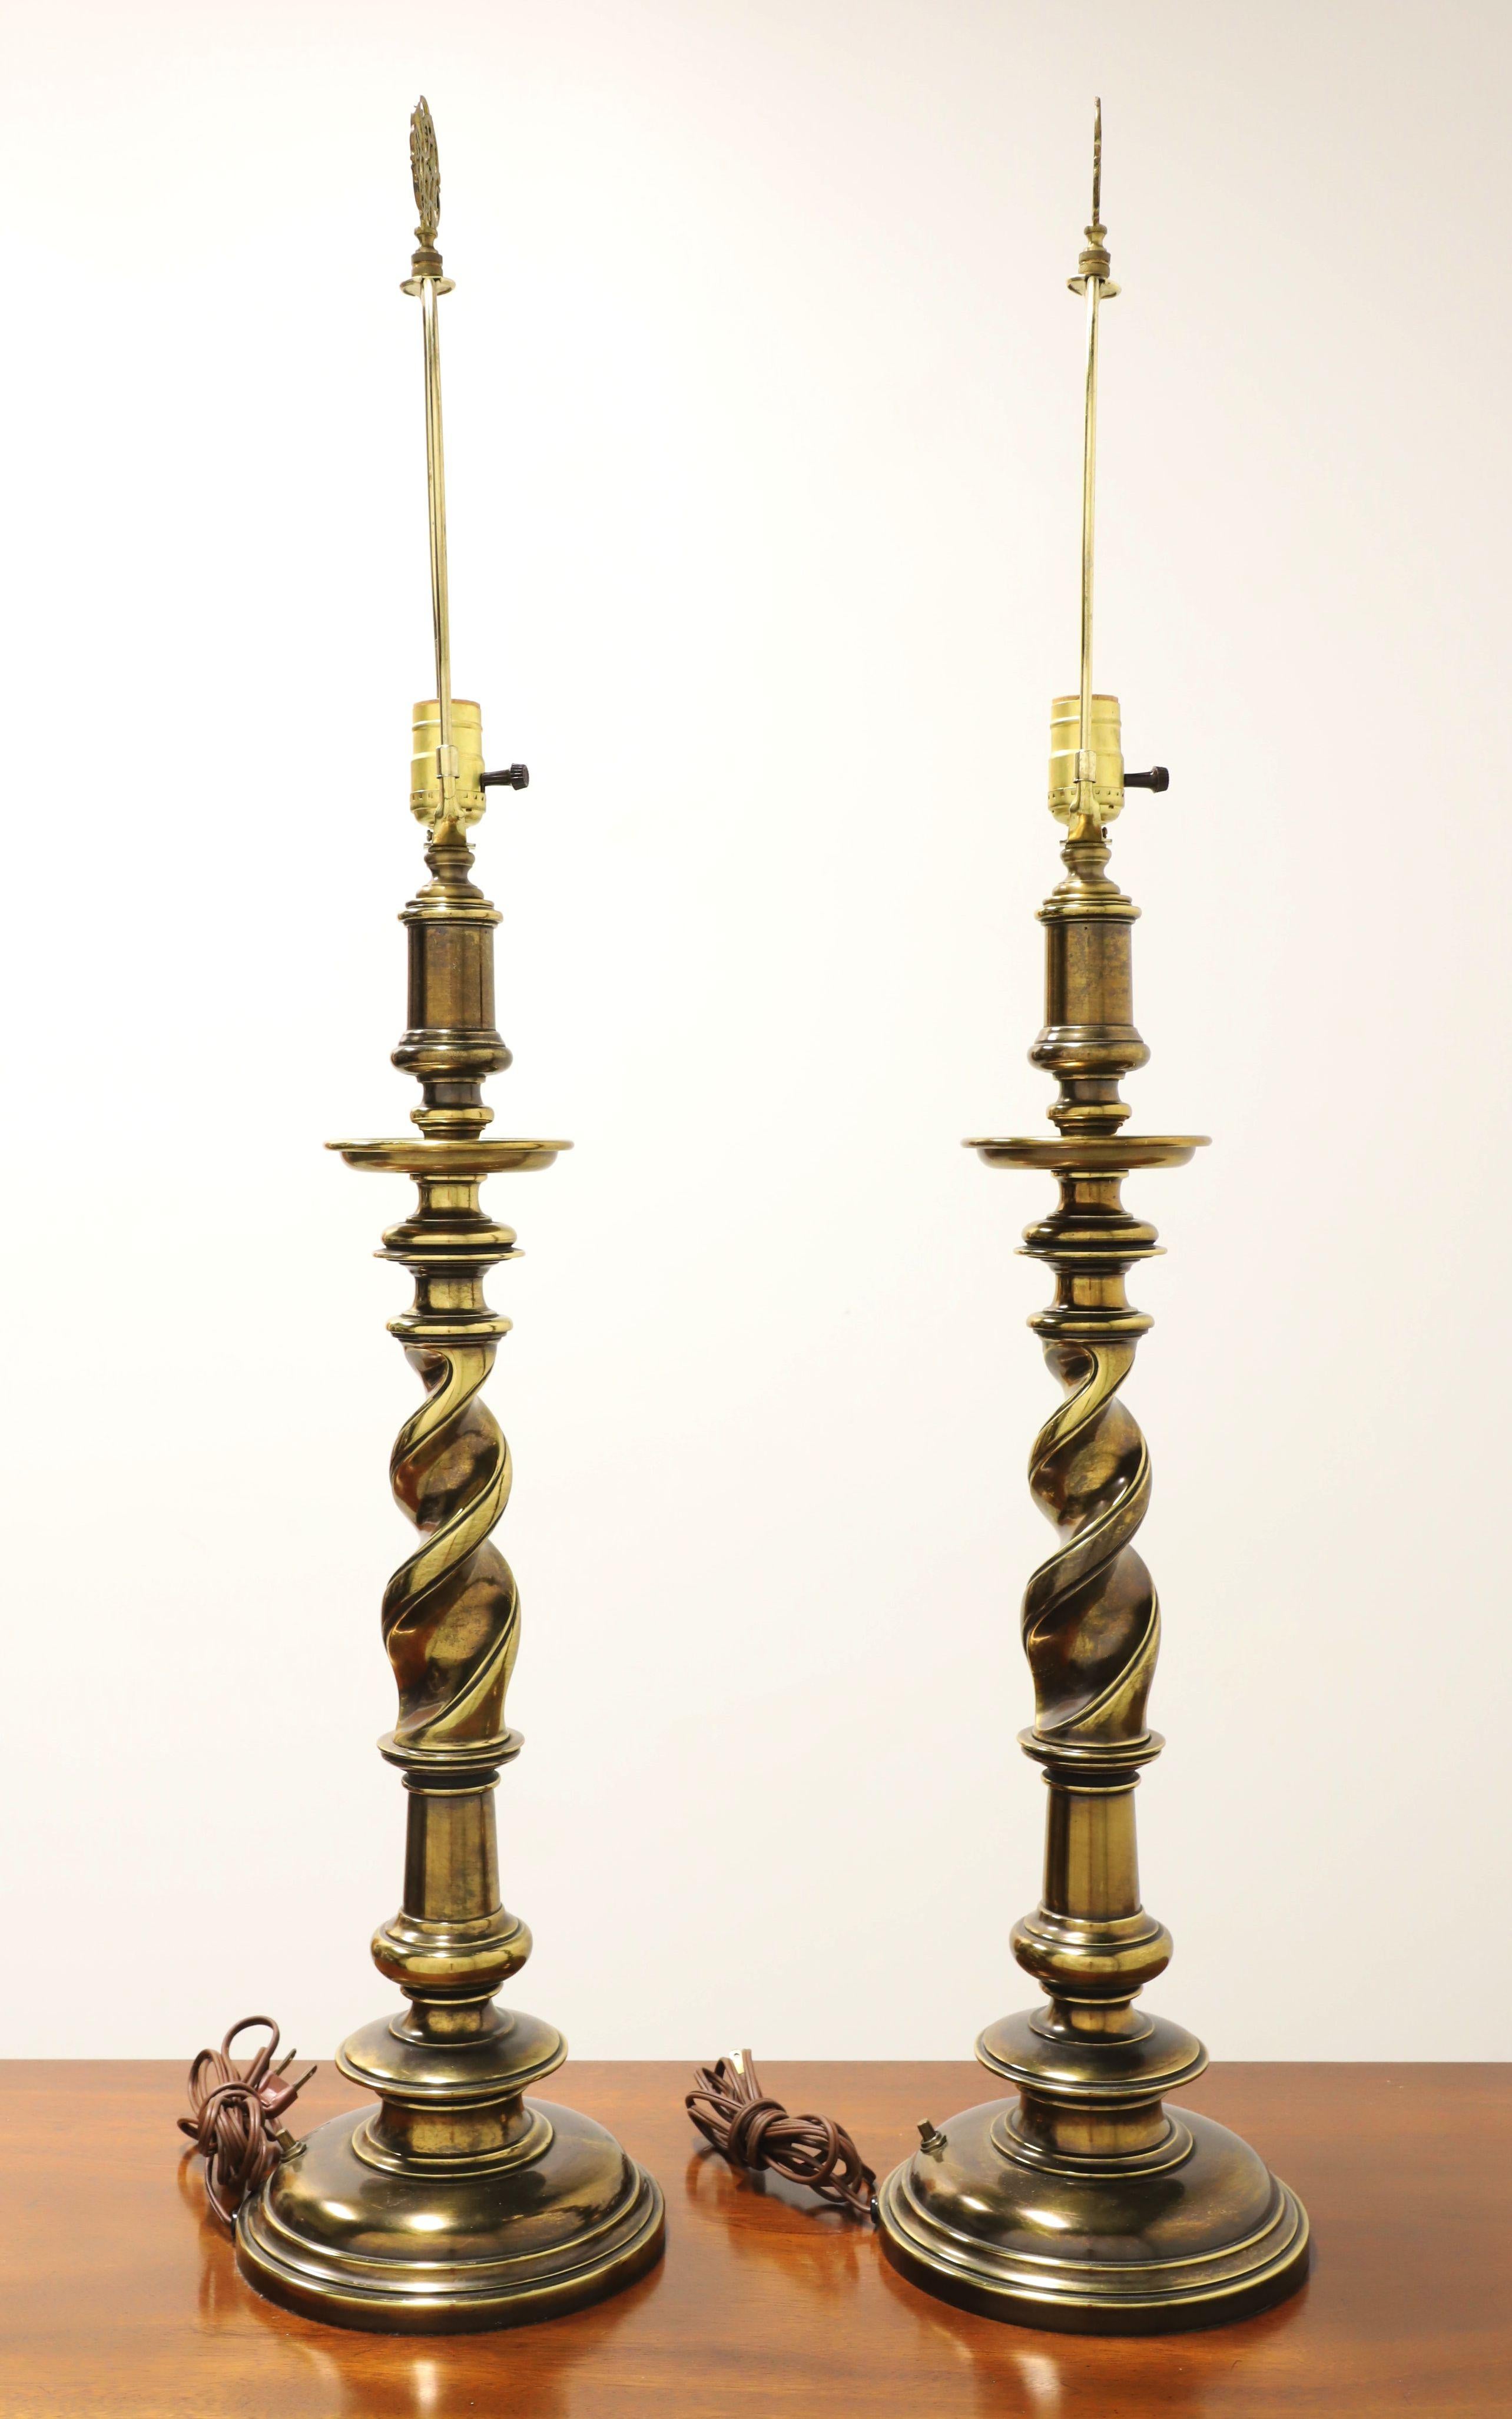 A pair of Hollywood Regency style table lamps, unbranded. Made of solid brass with a candlestick shape, distinctive barley twist design, and a brass base. Has a removable metal harp and decorative brass filigree finial. Single standard bulb socket